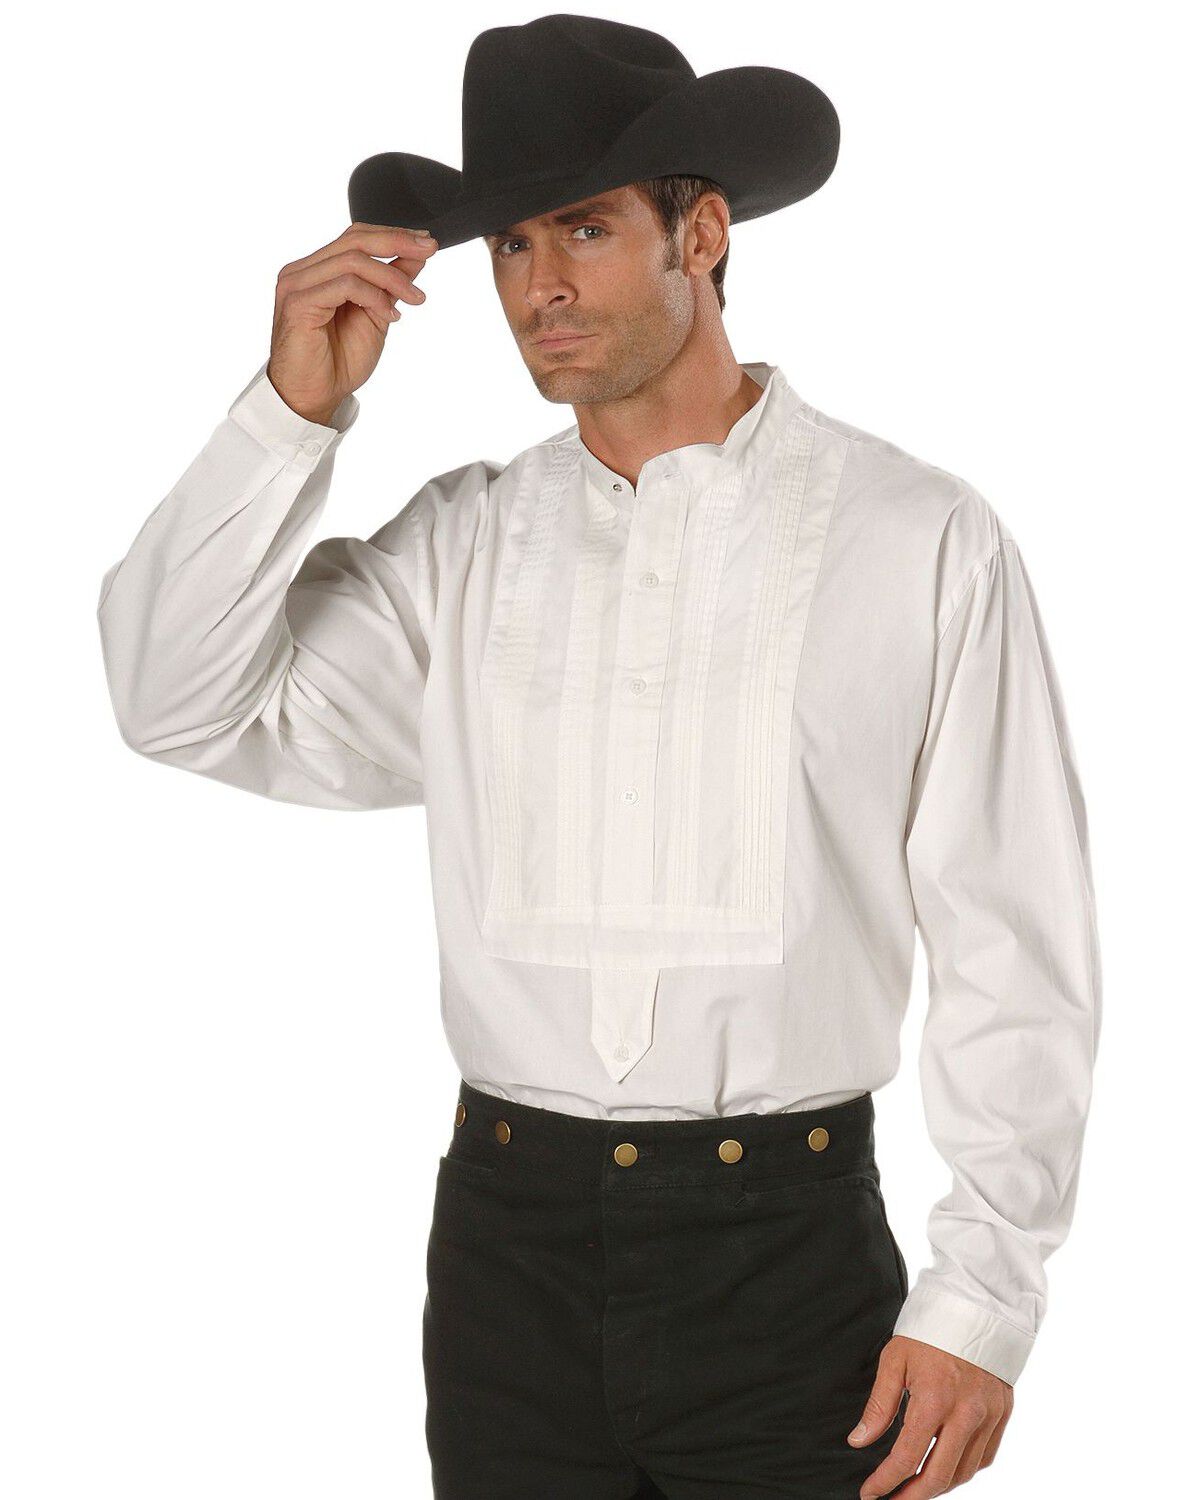 FRONTIER CLASSICS OLD WEST COWBOY CLOTHING GAMBLER SHIRT 